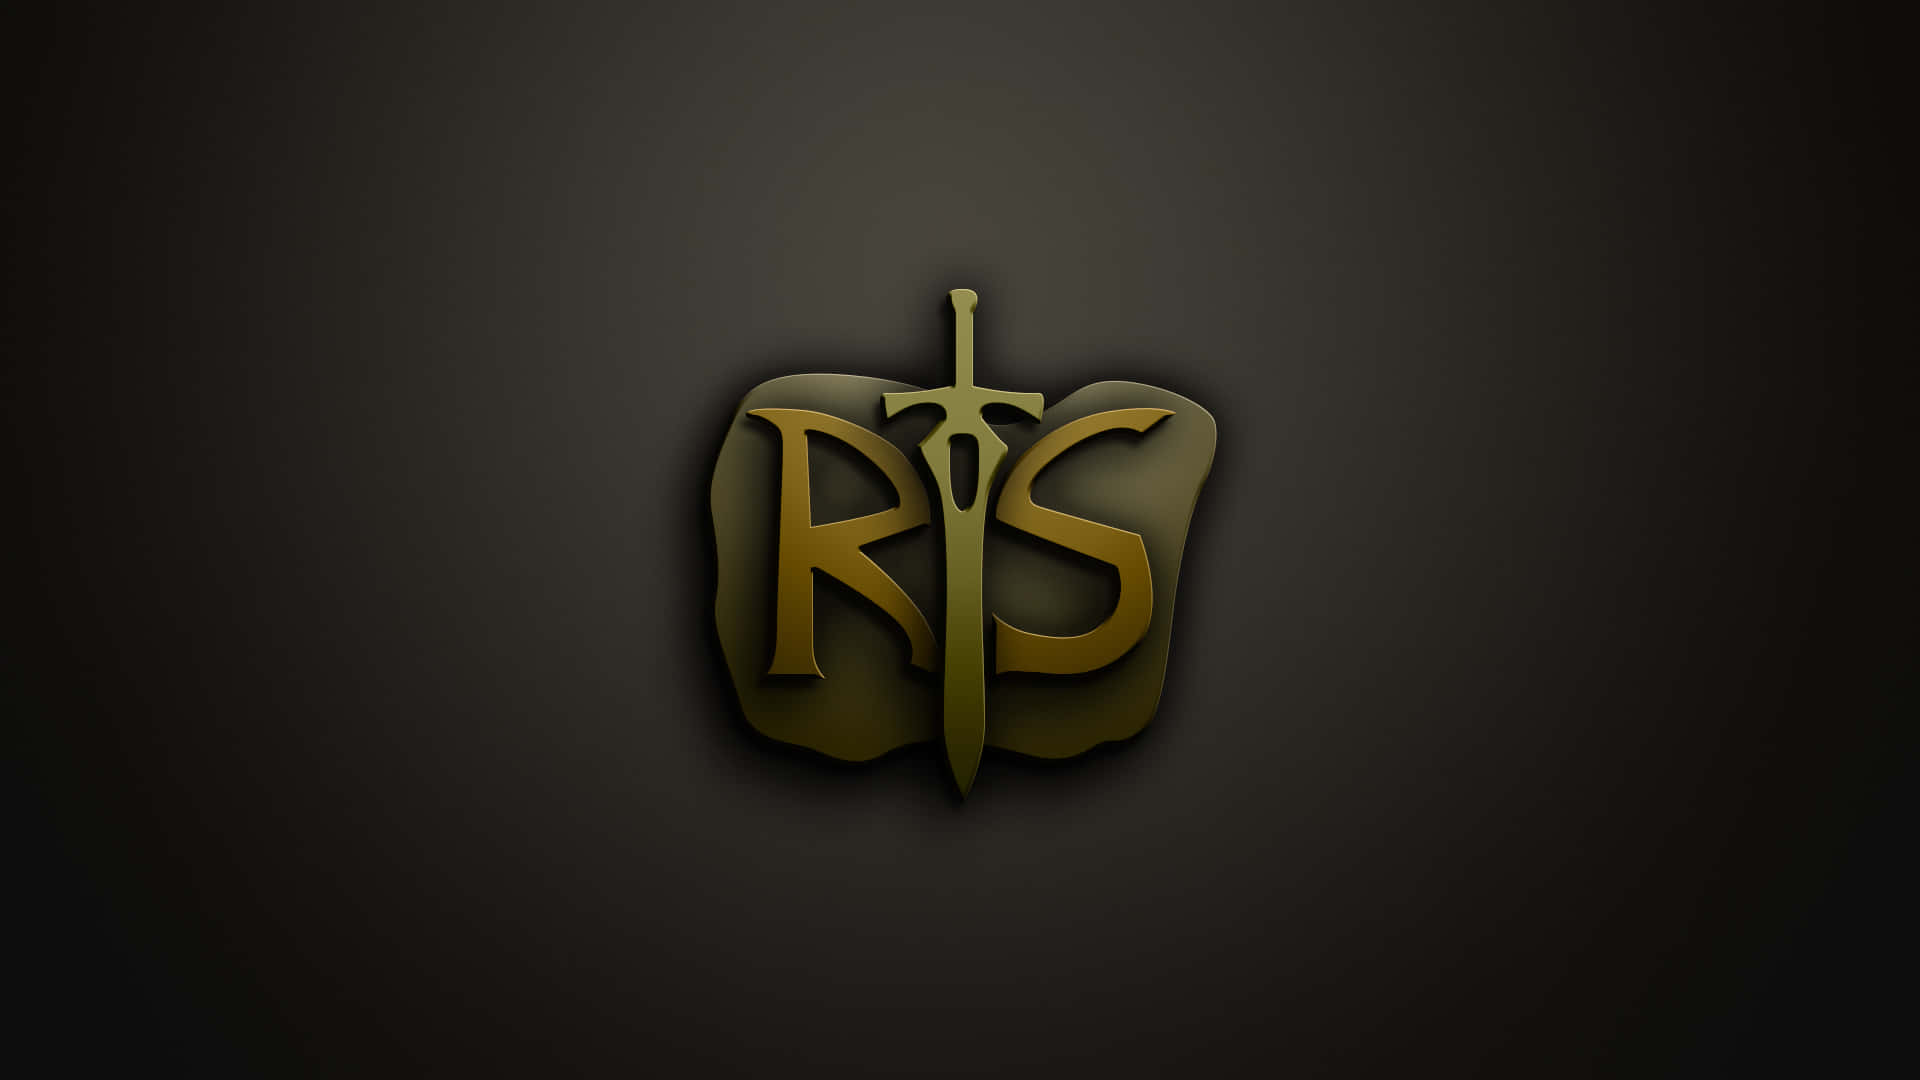 a gold sword with the letter rs on it